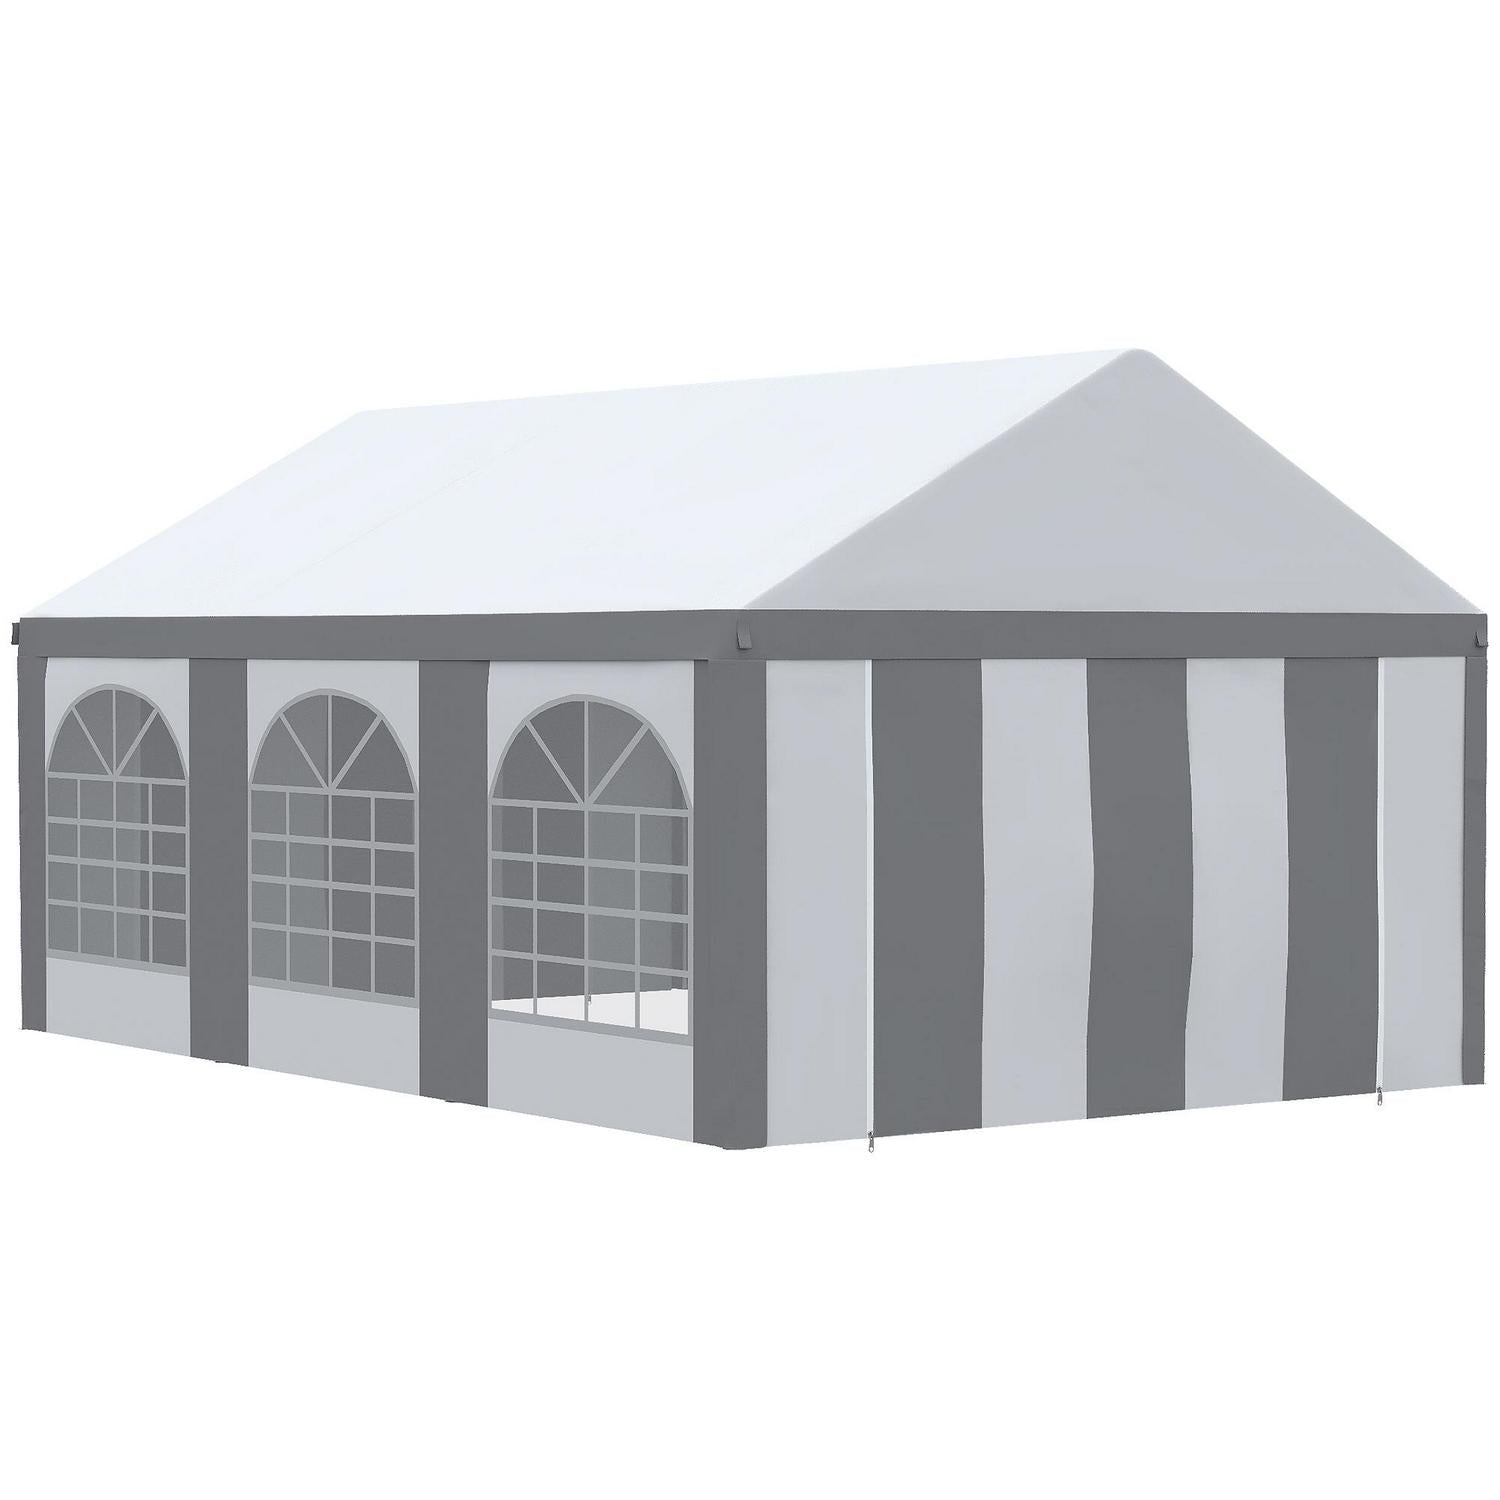 Galvanised Party Tent, Marquee Gazebo With Sides- White Grey